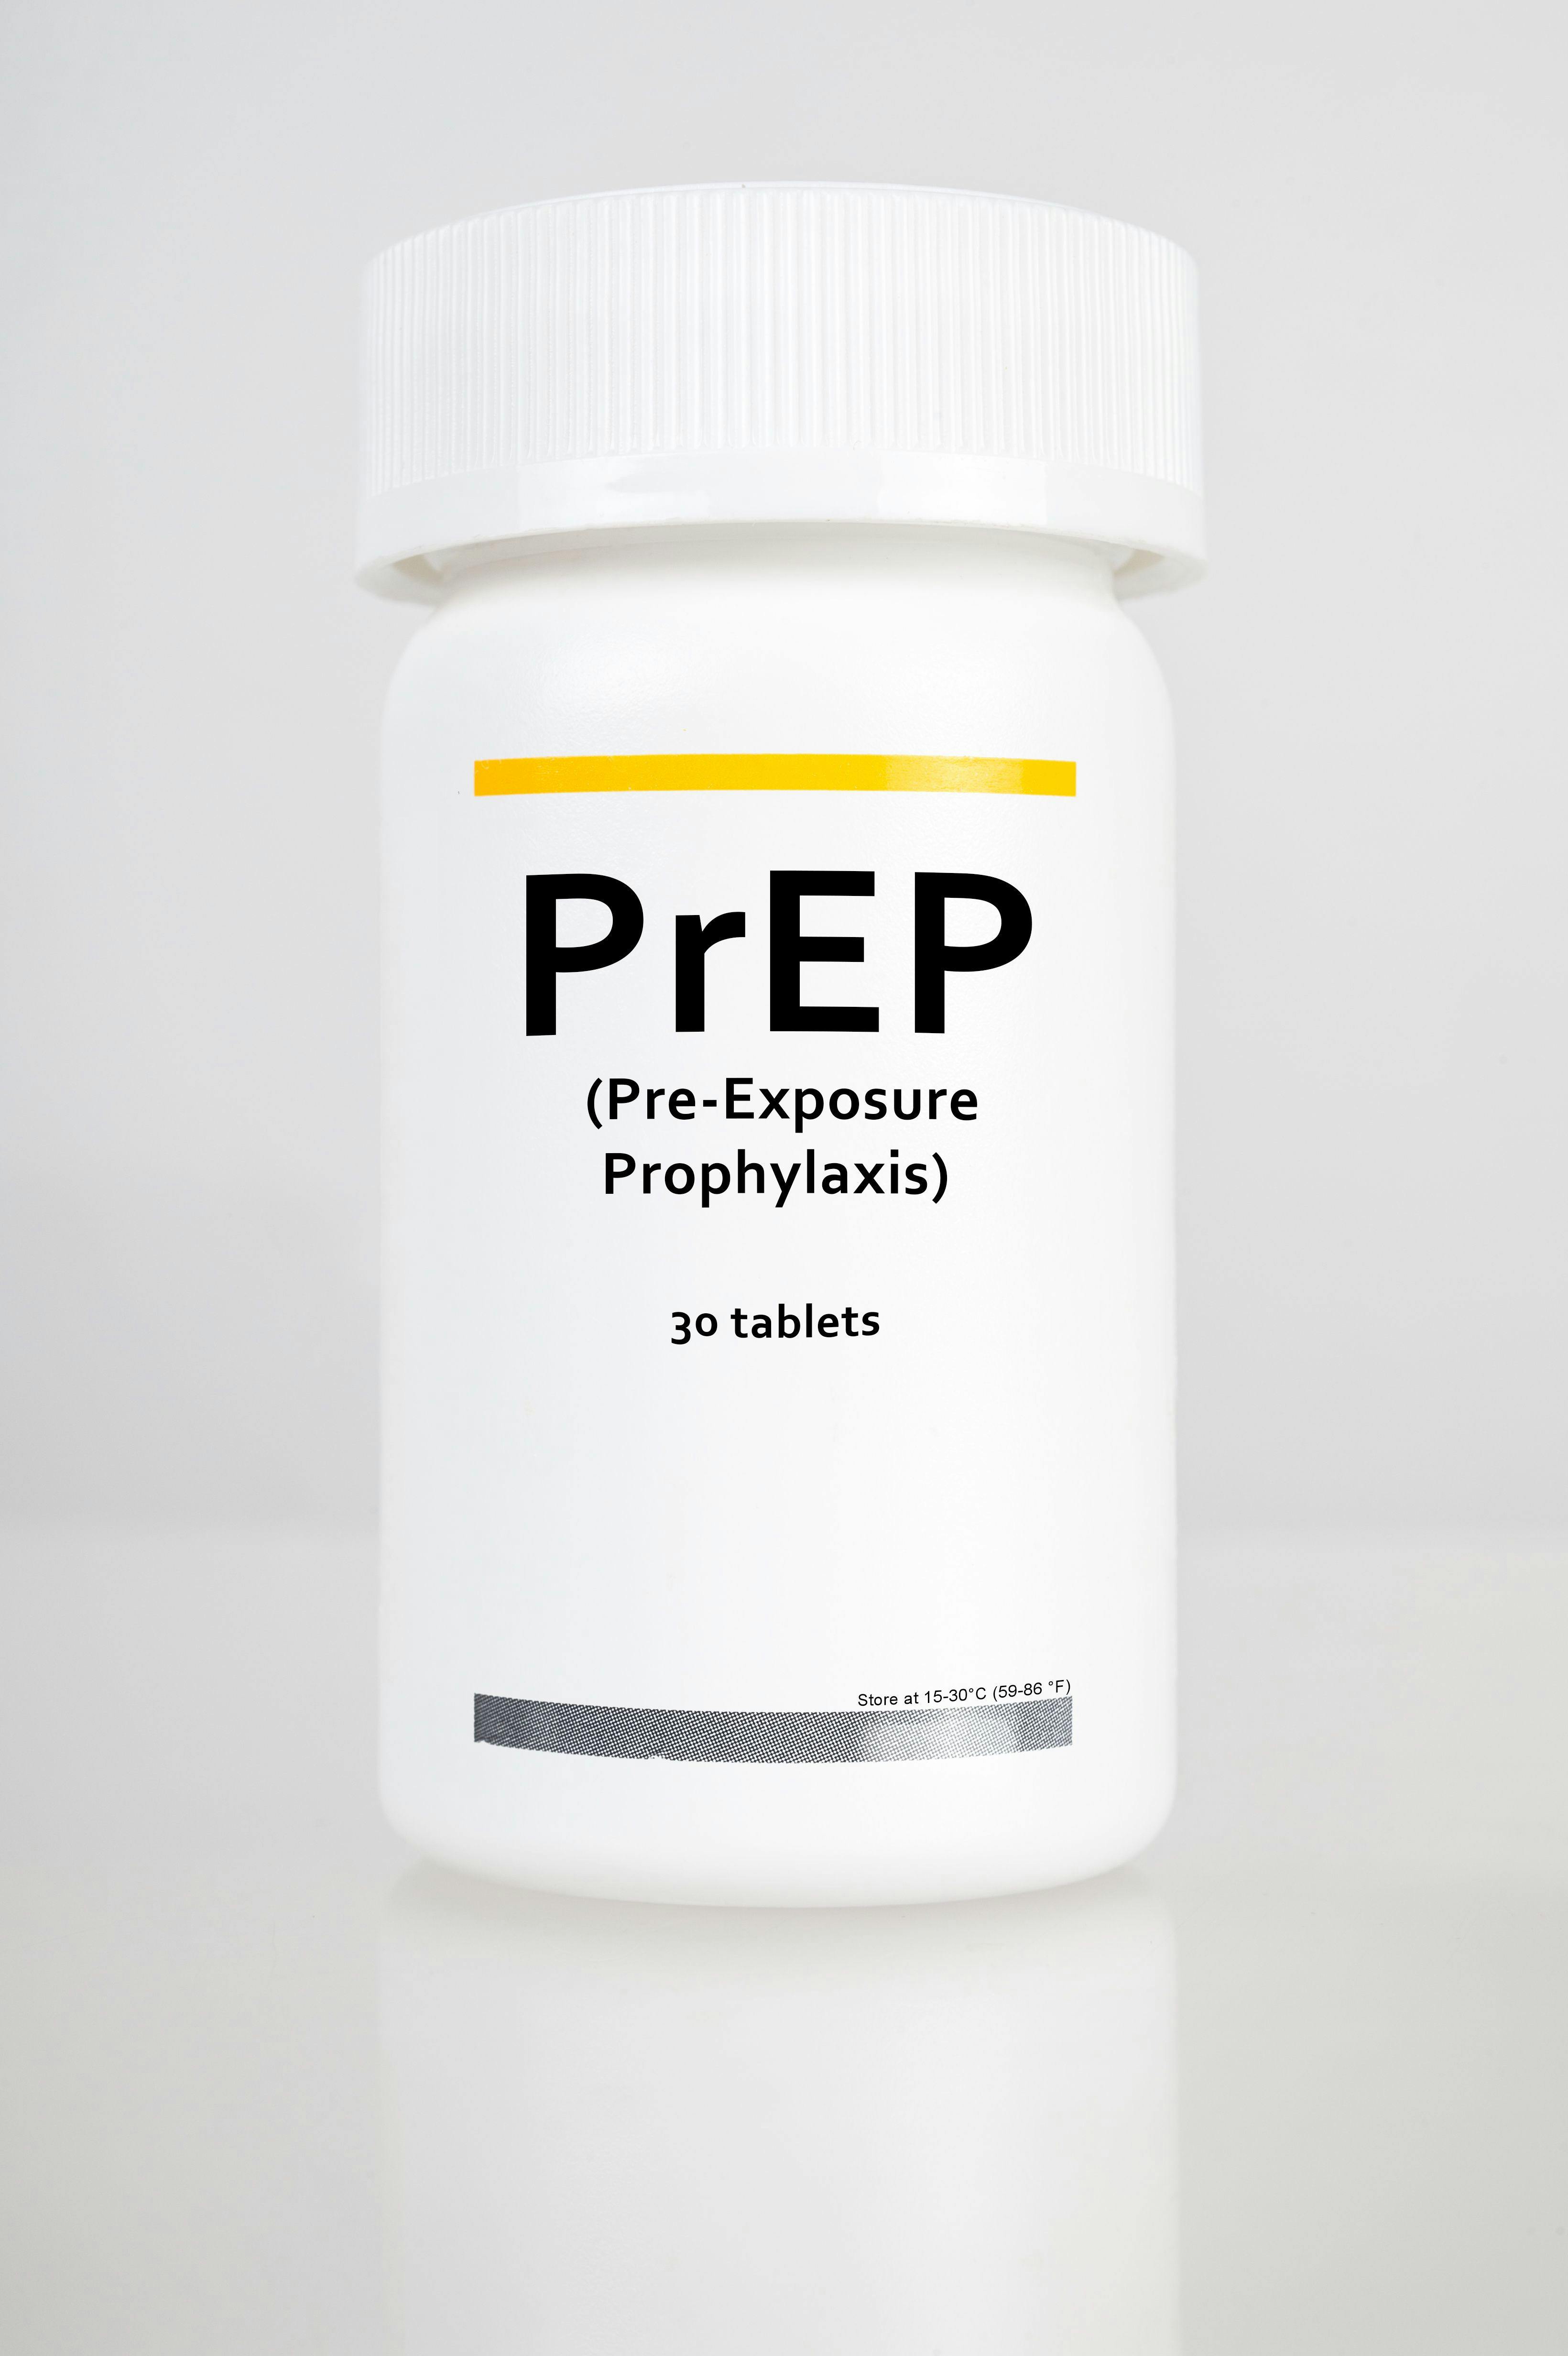 Pre-exposure Prophylaxis | Image credit: mbruxelle - stock.adobe.com